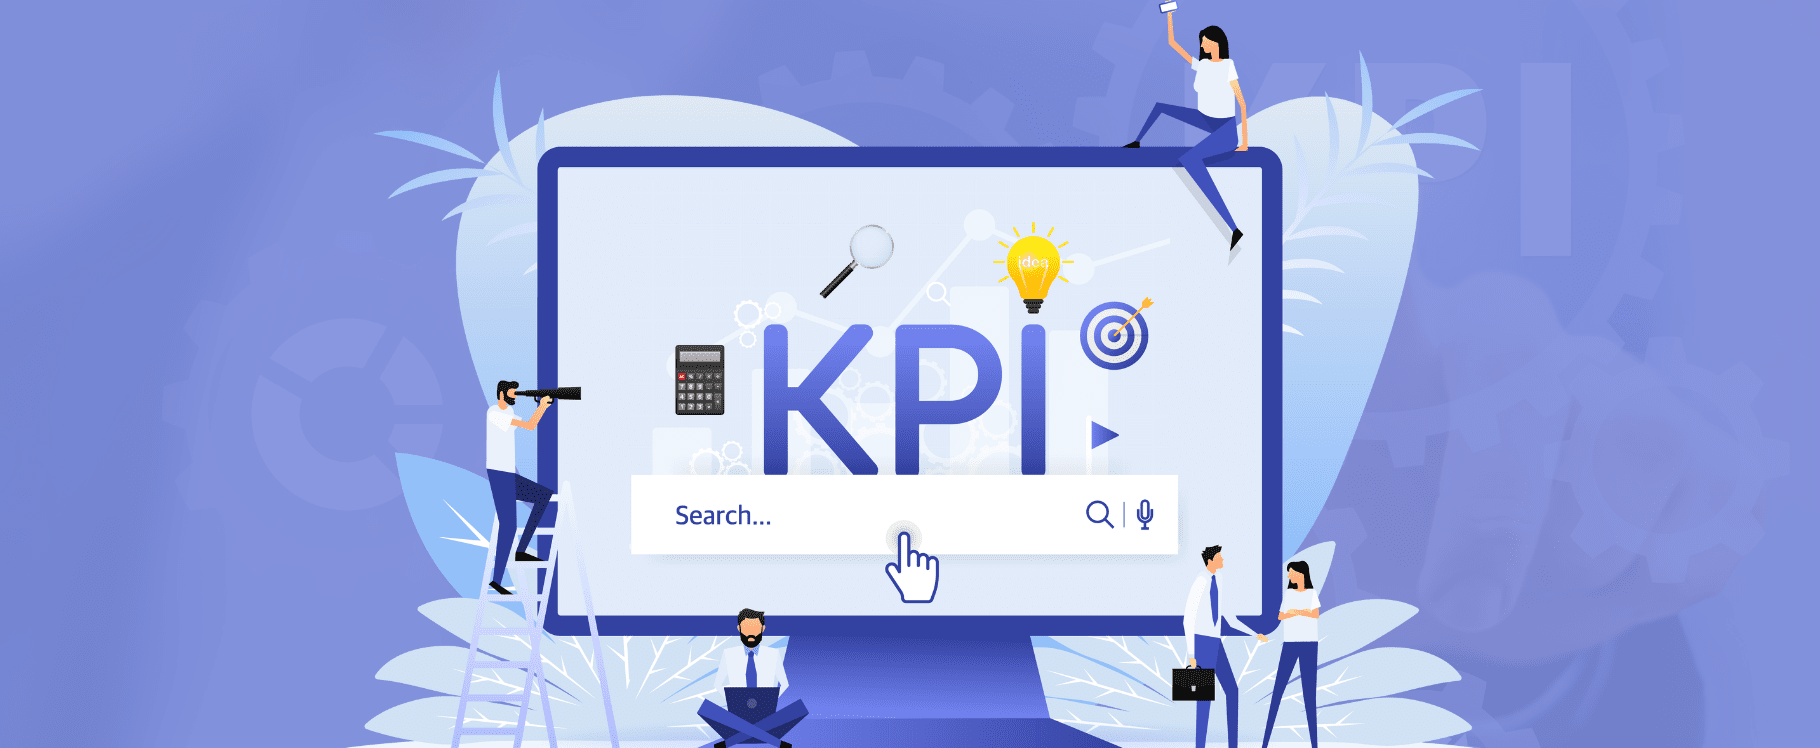 why are kpis important